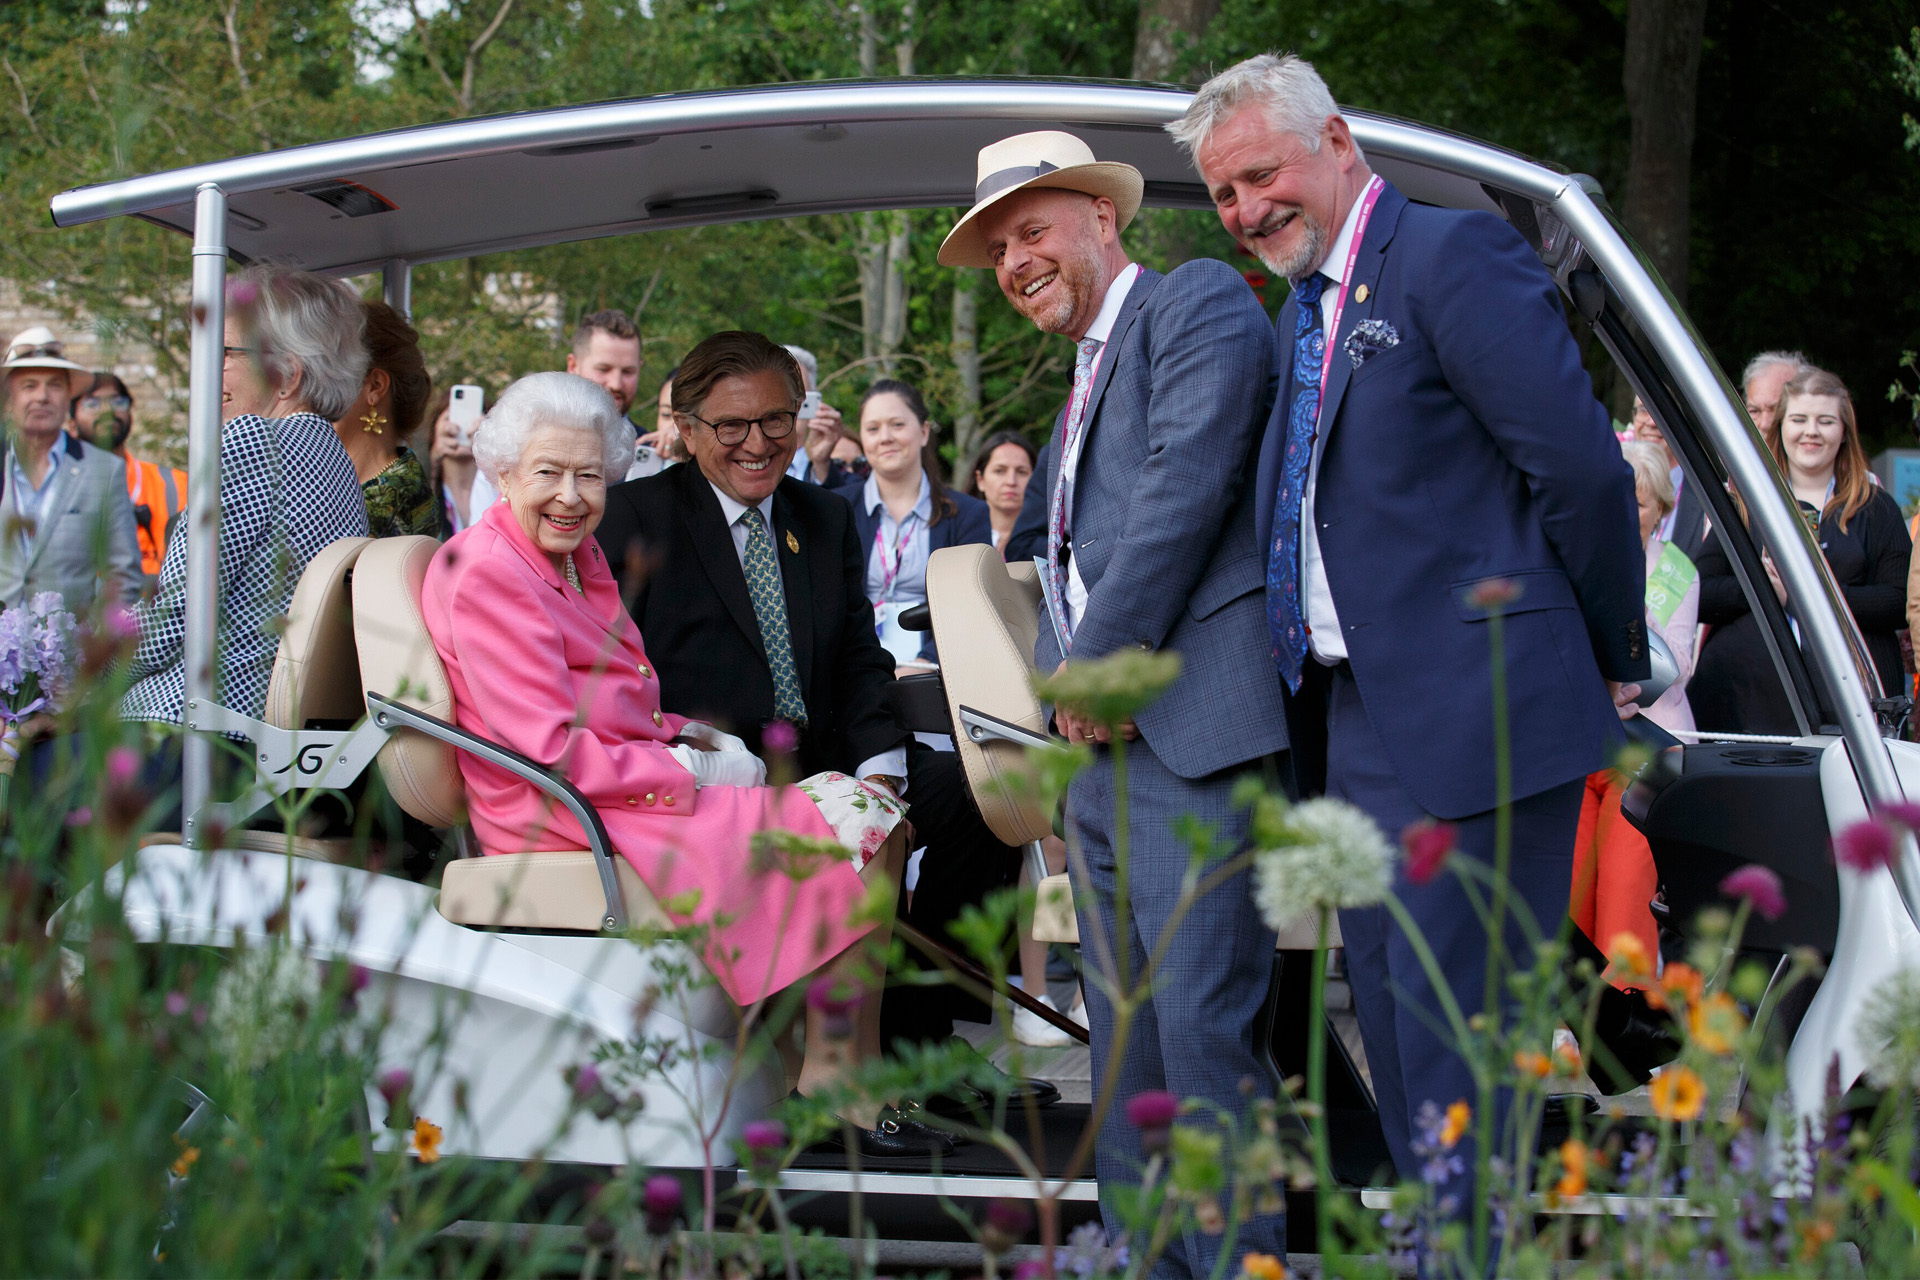 Britain's Queen Elizabeth smiles with garden designer Joe Swift and Mark Gregoy, an RHS ambassador, at the 'BBC Studios Our Green Planet and RHS Bee Garden', as she tours the garden in a buggy with RHS president Keith Weed during a royal visit to RHS Chelsea Flower Show 2022, Monday May 23, 2022